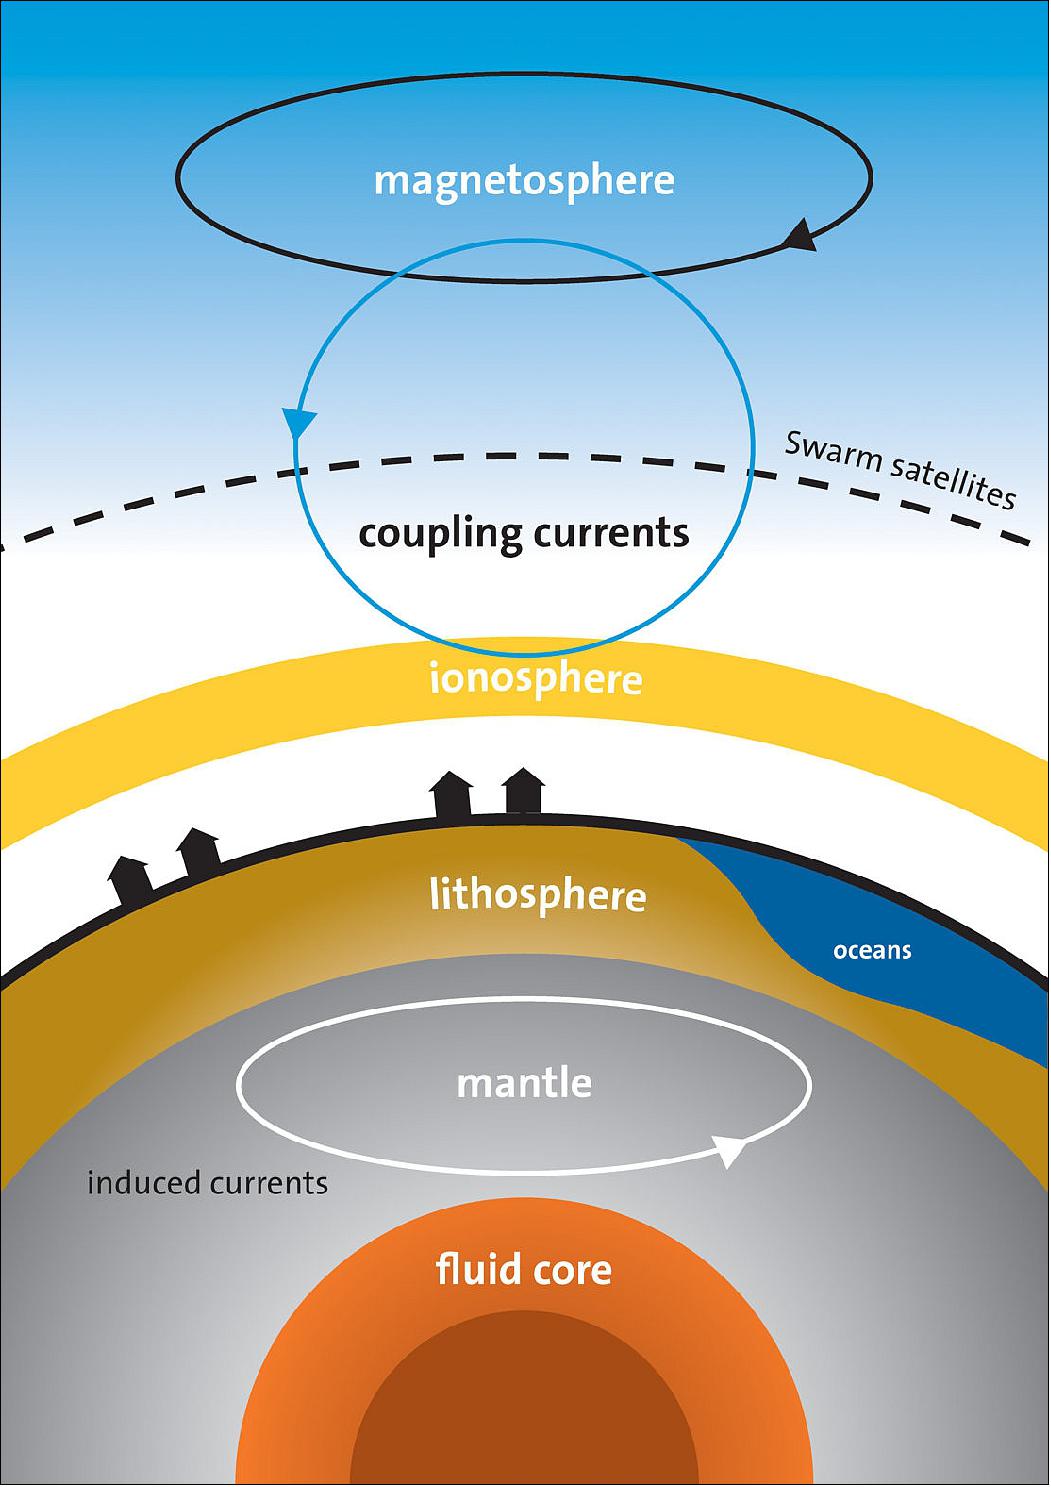 Figure 91: The different sources that contribute to the magnetic field measured by Swarm. The coupling currents or field-aligned currents flow along magnetic field lines between the magnetosphere and ionosphere (image credit: ESA/DTU Space)